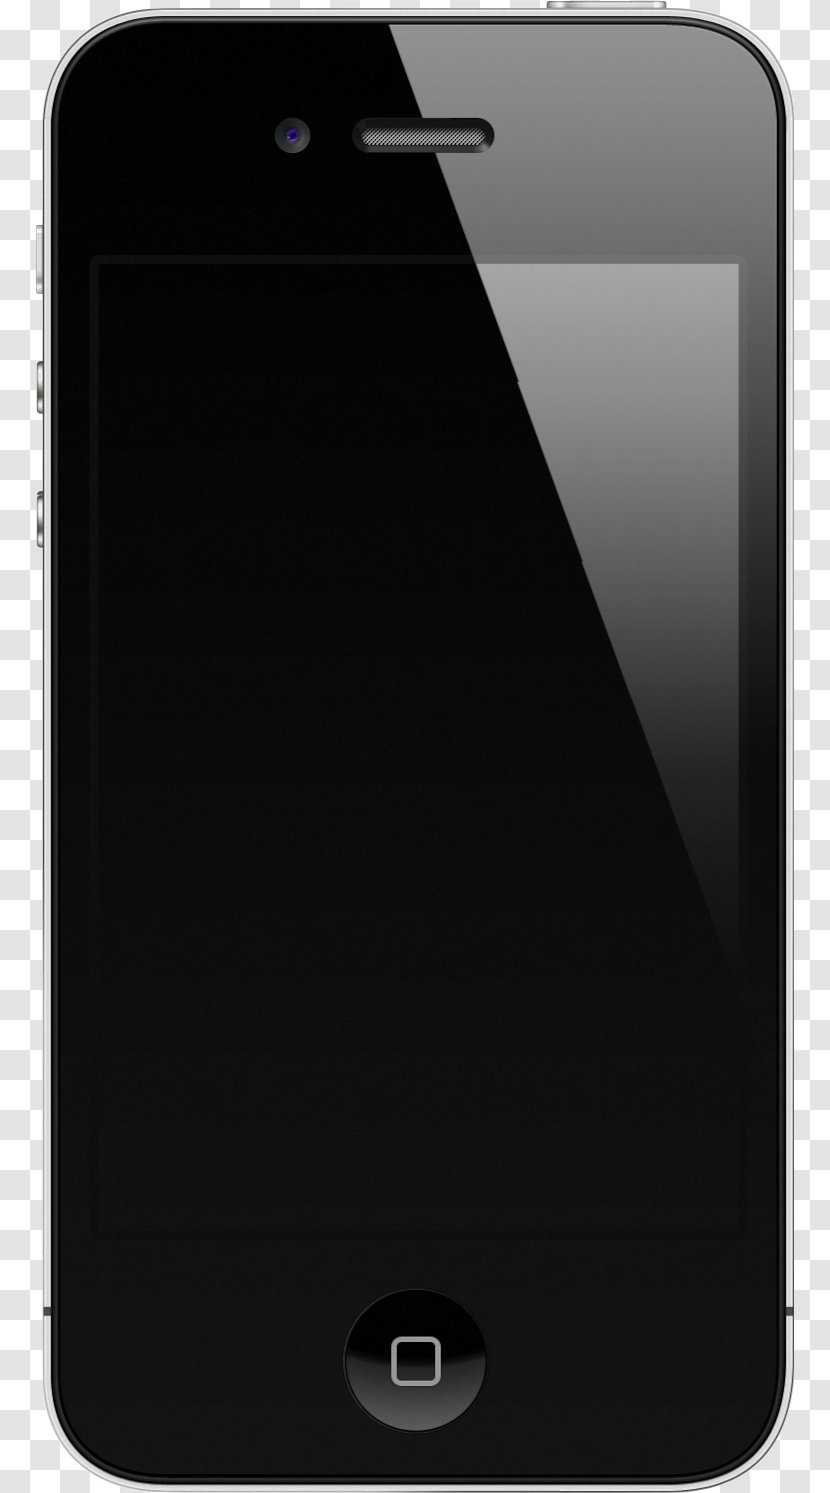 IPhone 4S 5 3GS - Iphone 5s - Apple Transparent PNG